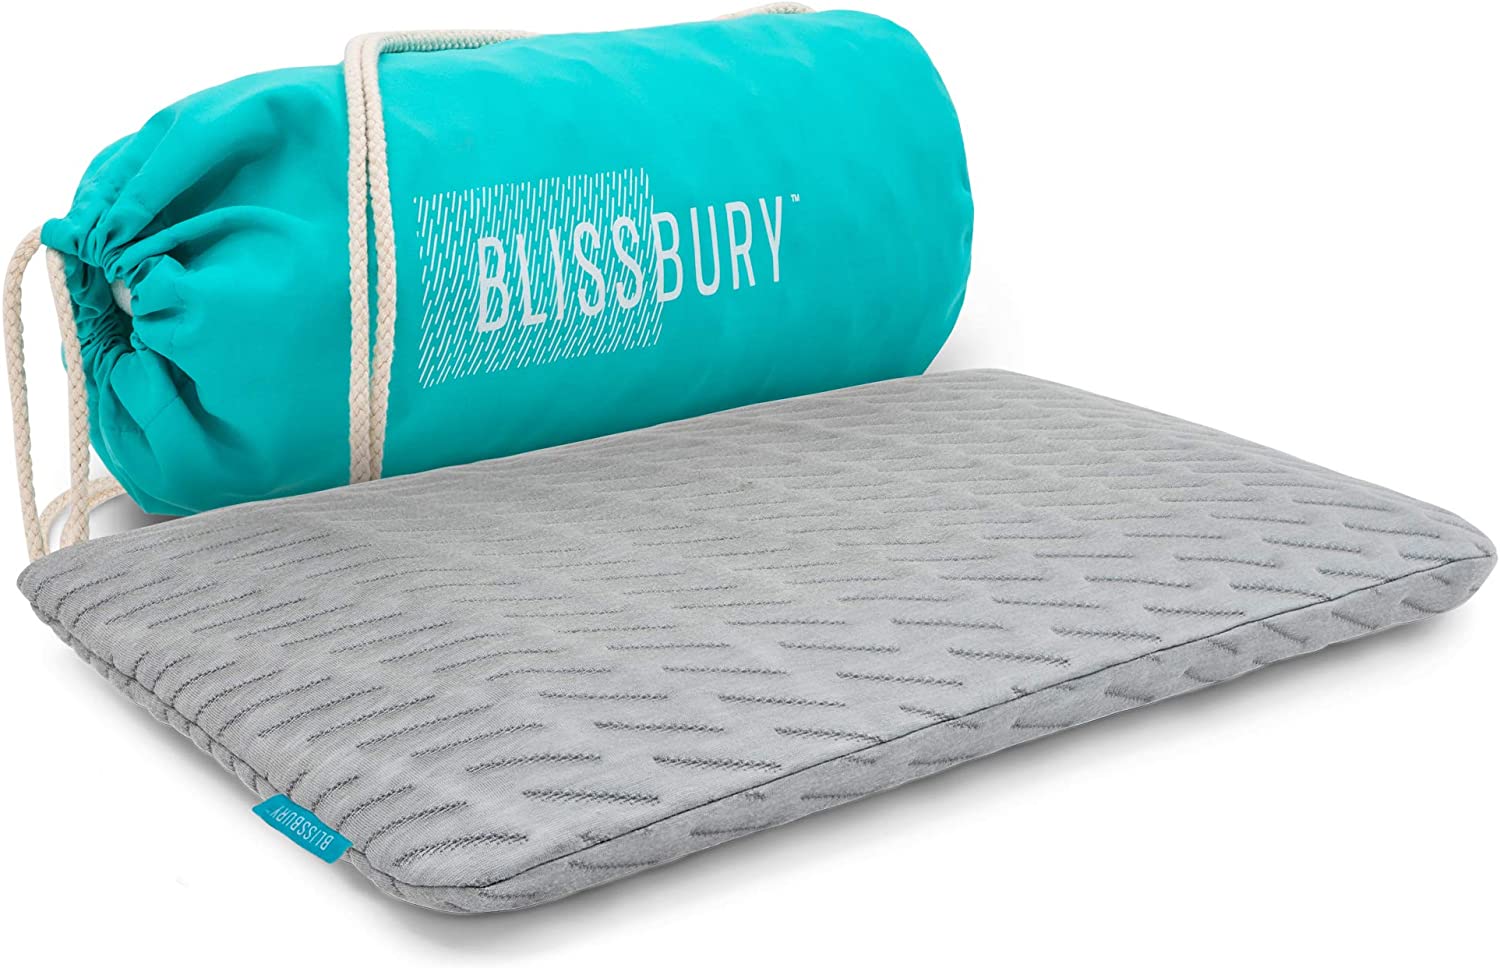 BLISSBURY Memory Foam Pillow For Stomach Sleepers, 2.6-Inch